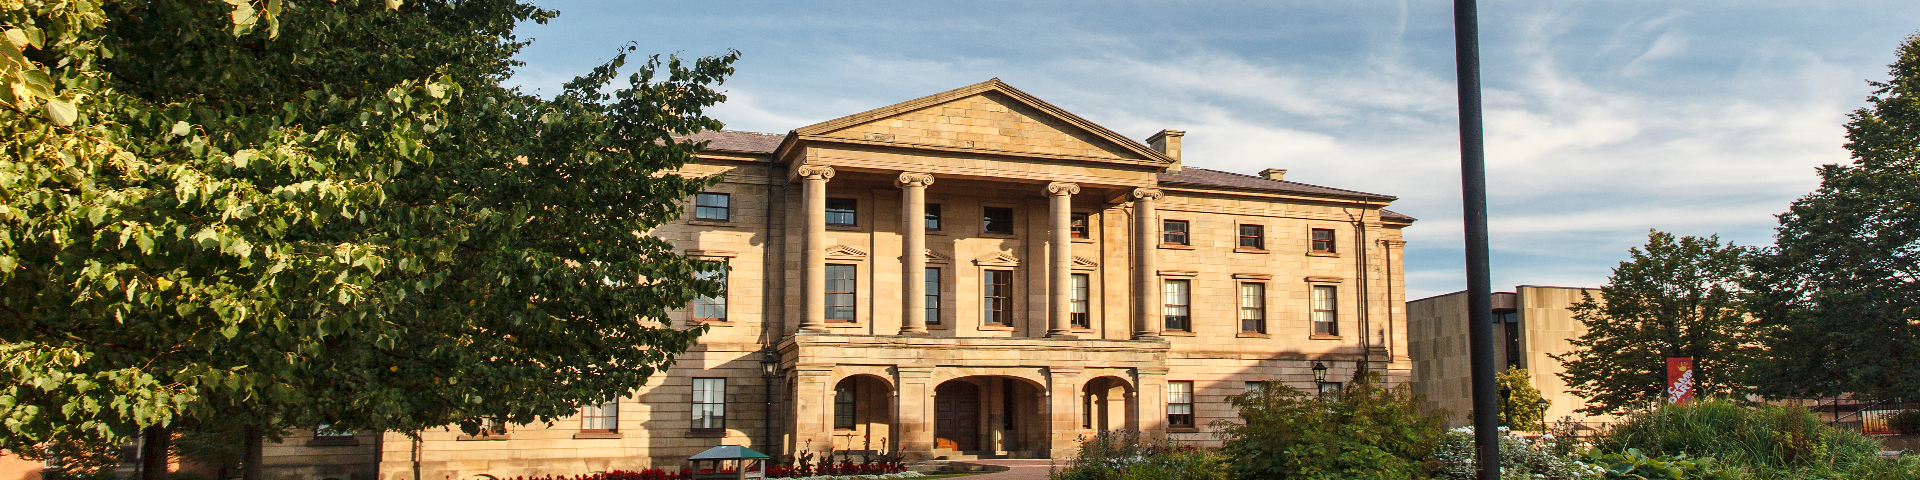 panoramic image of Province house on a sunny day